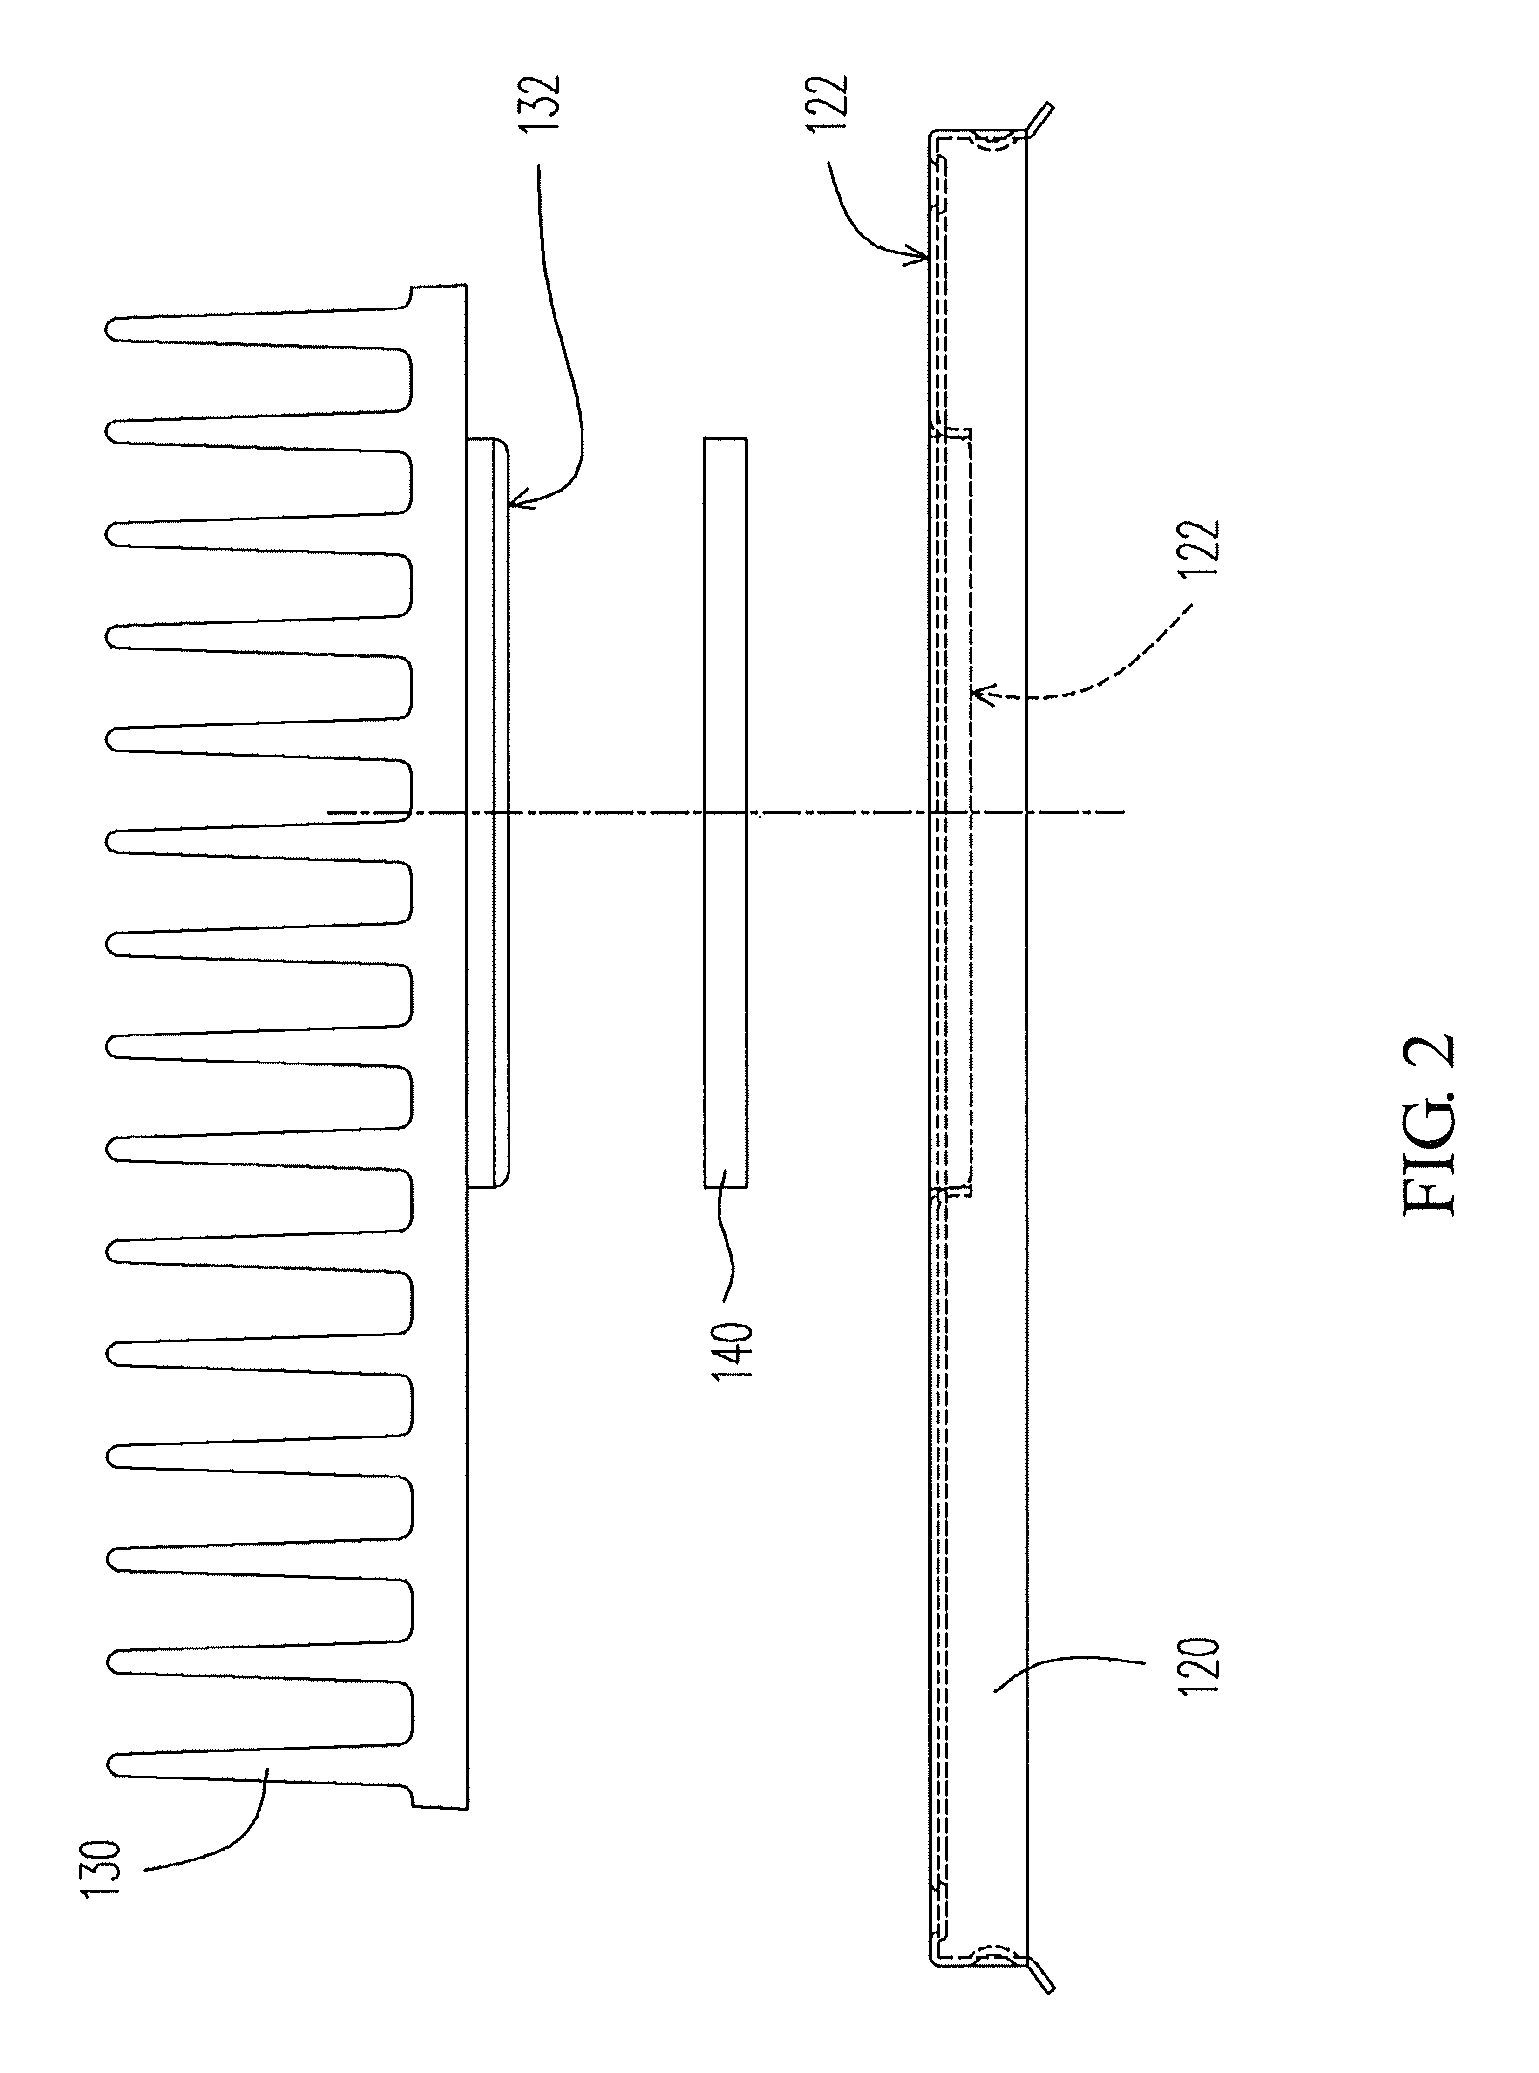 Electromagnetic shielding device with heat dissipating function